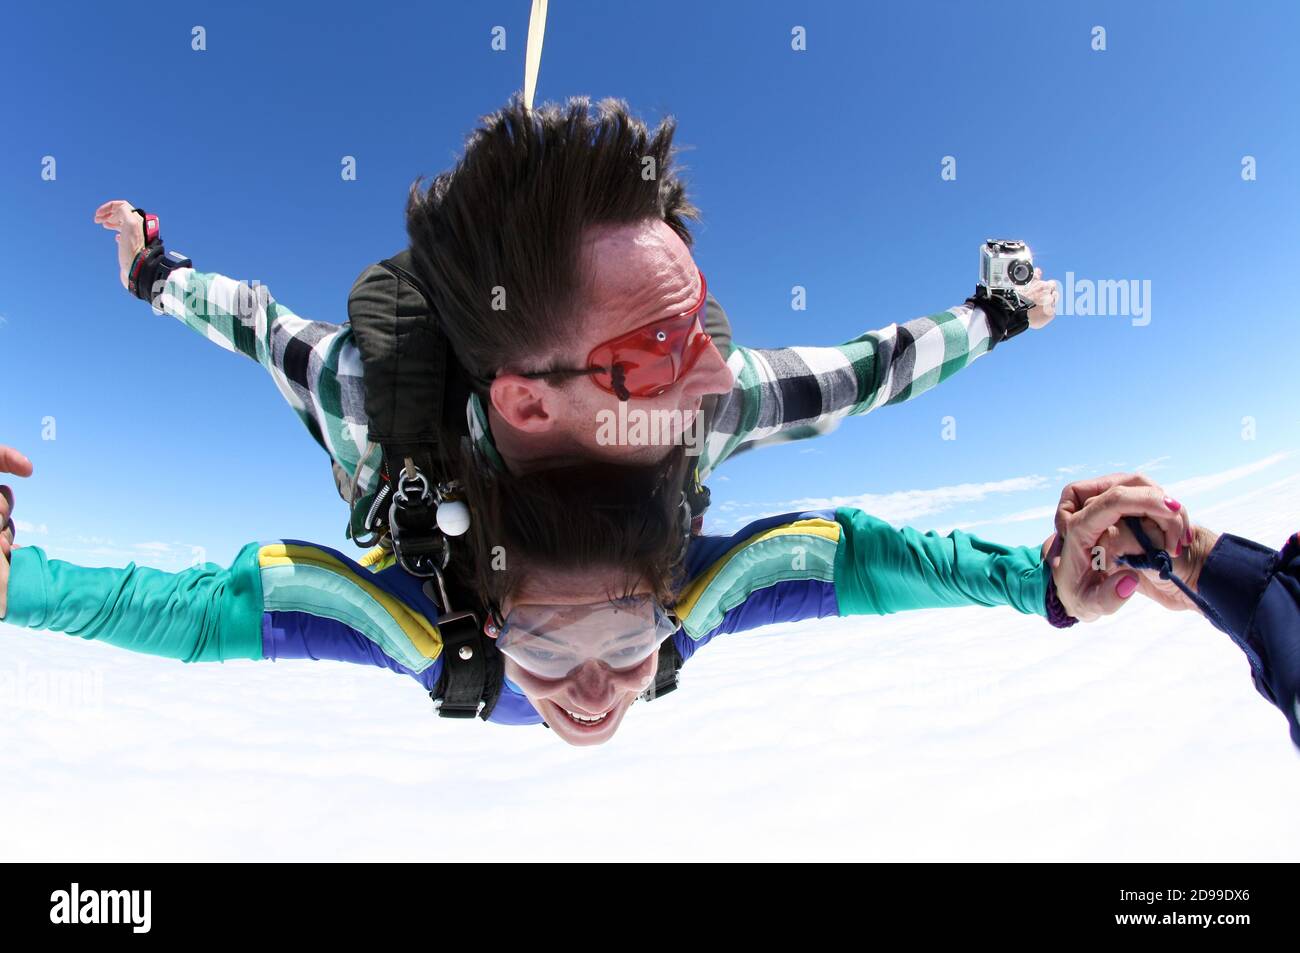 Sky diving tandem holding hands Stock Photo